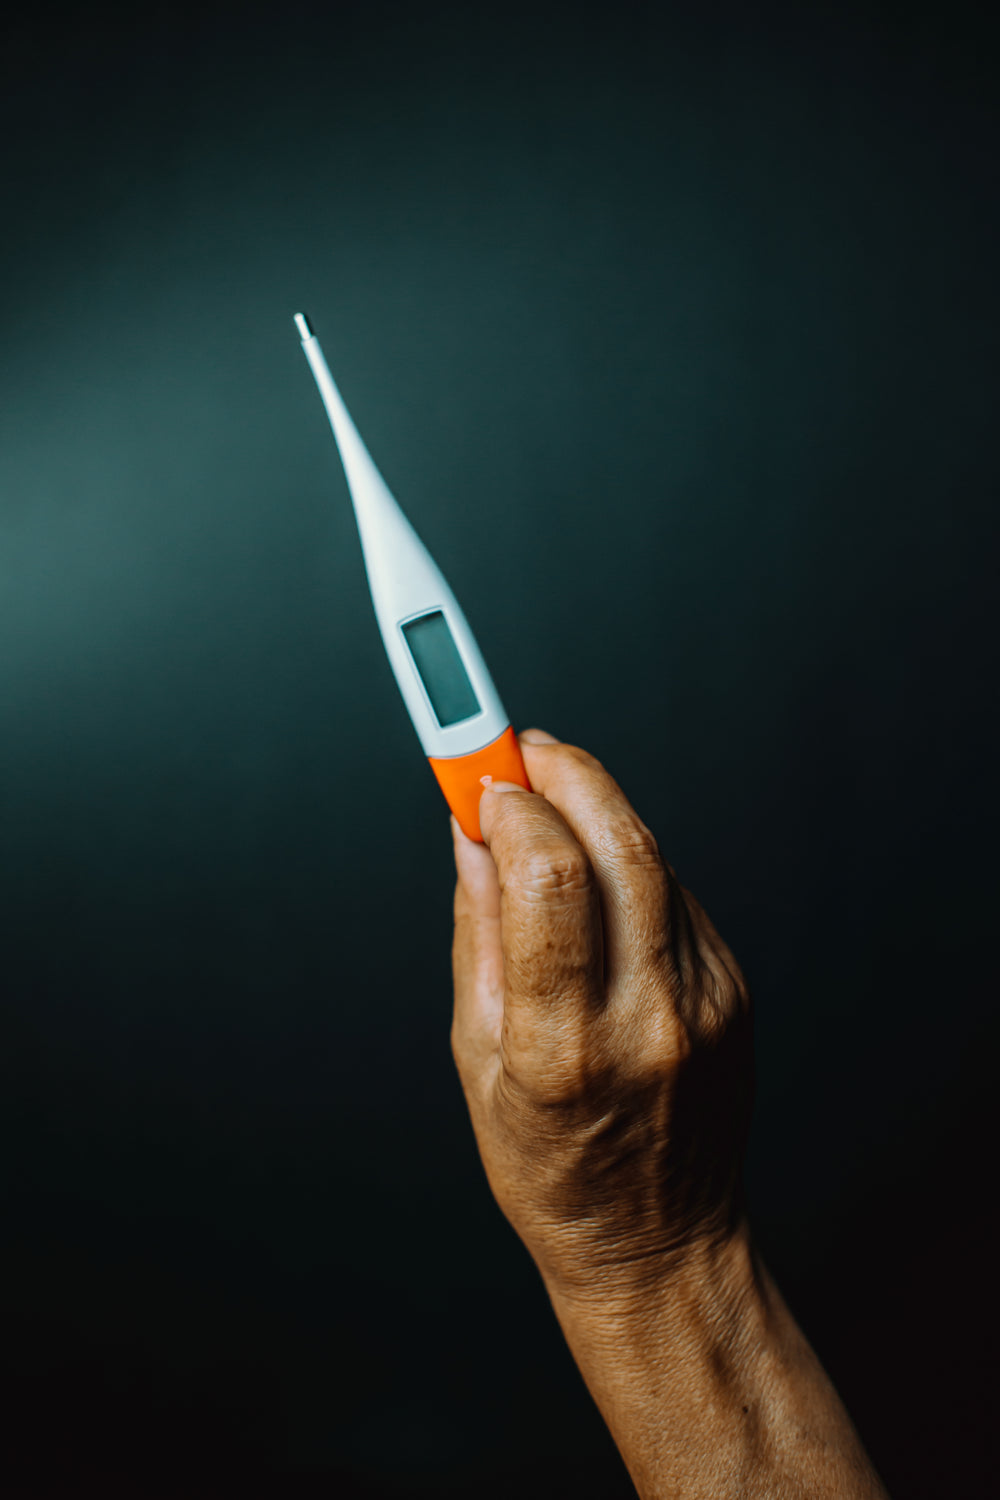 a hand holds up a thermometer against black background